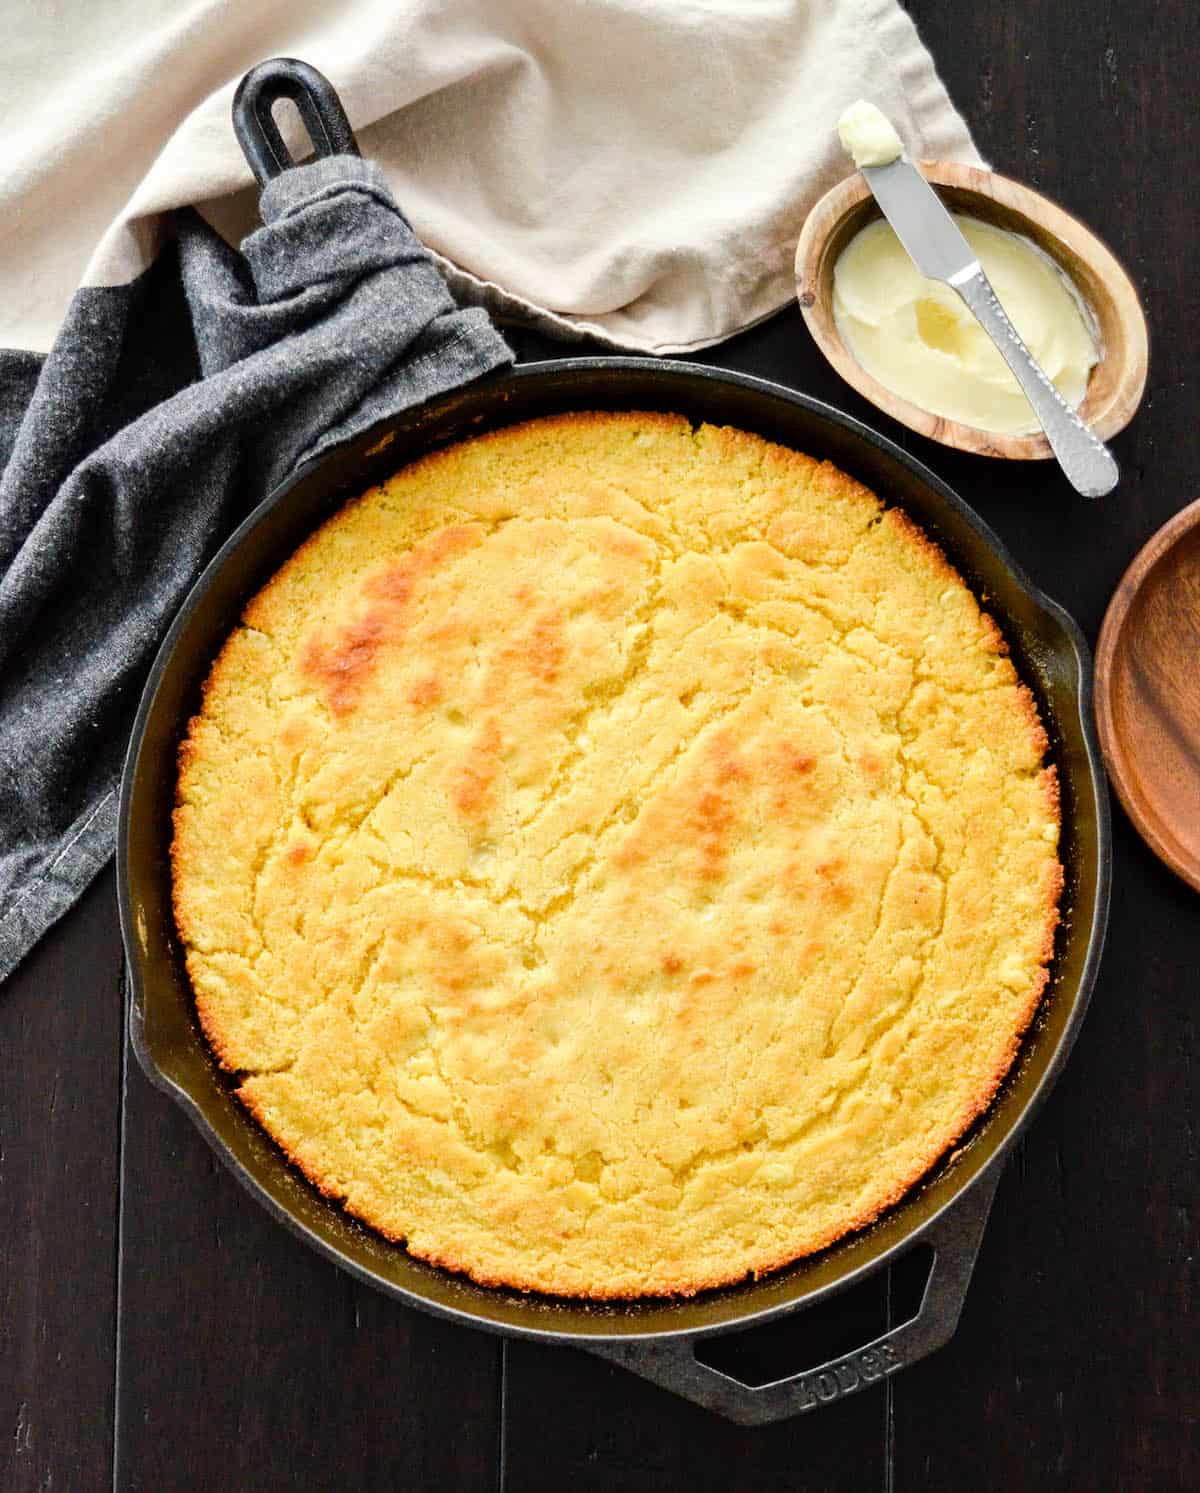 skillet cornbread baked in a black cast iron skillet before cutting